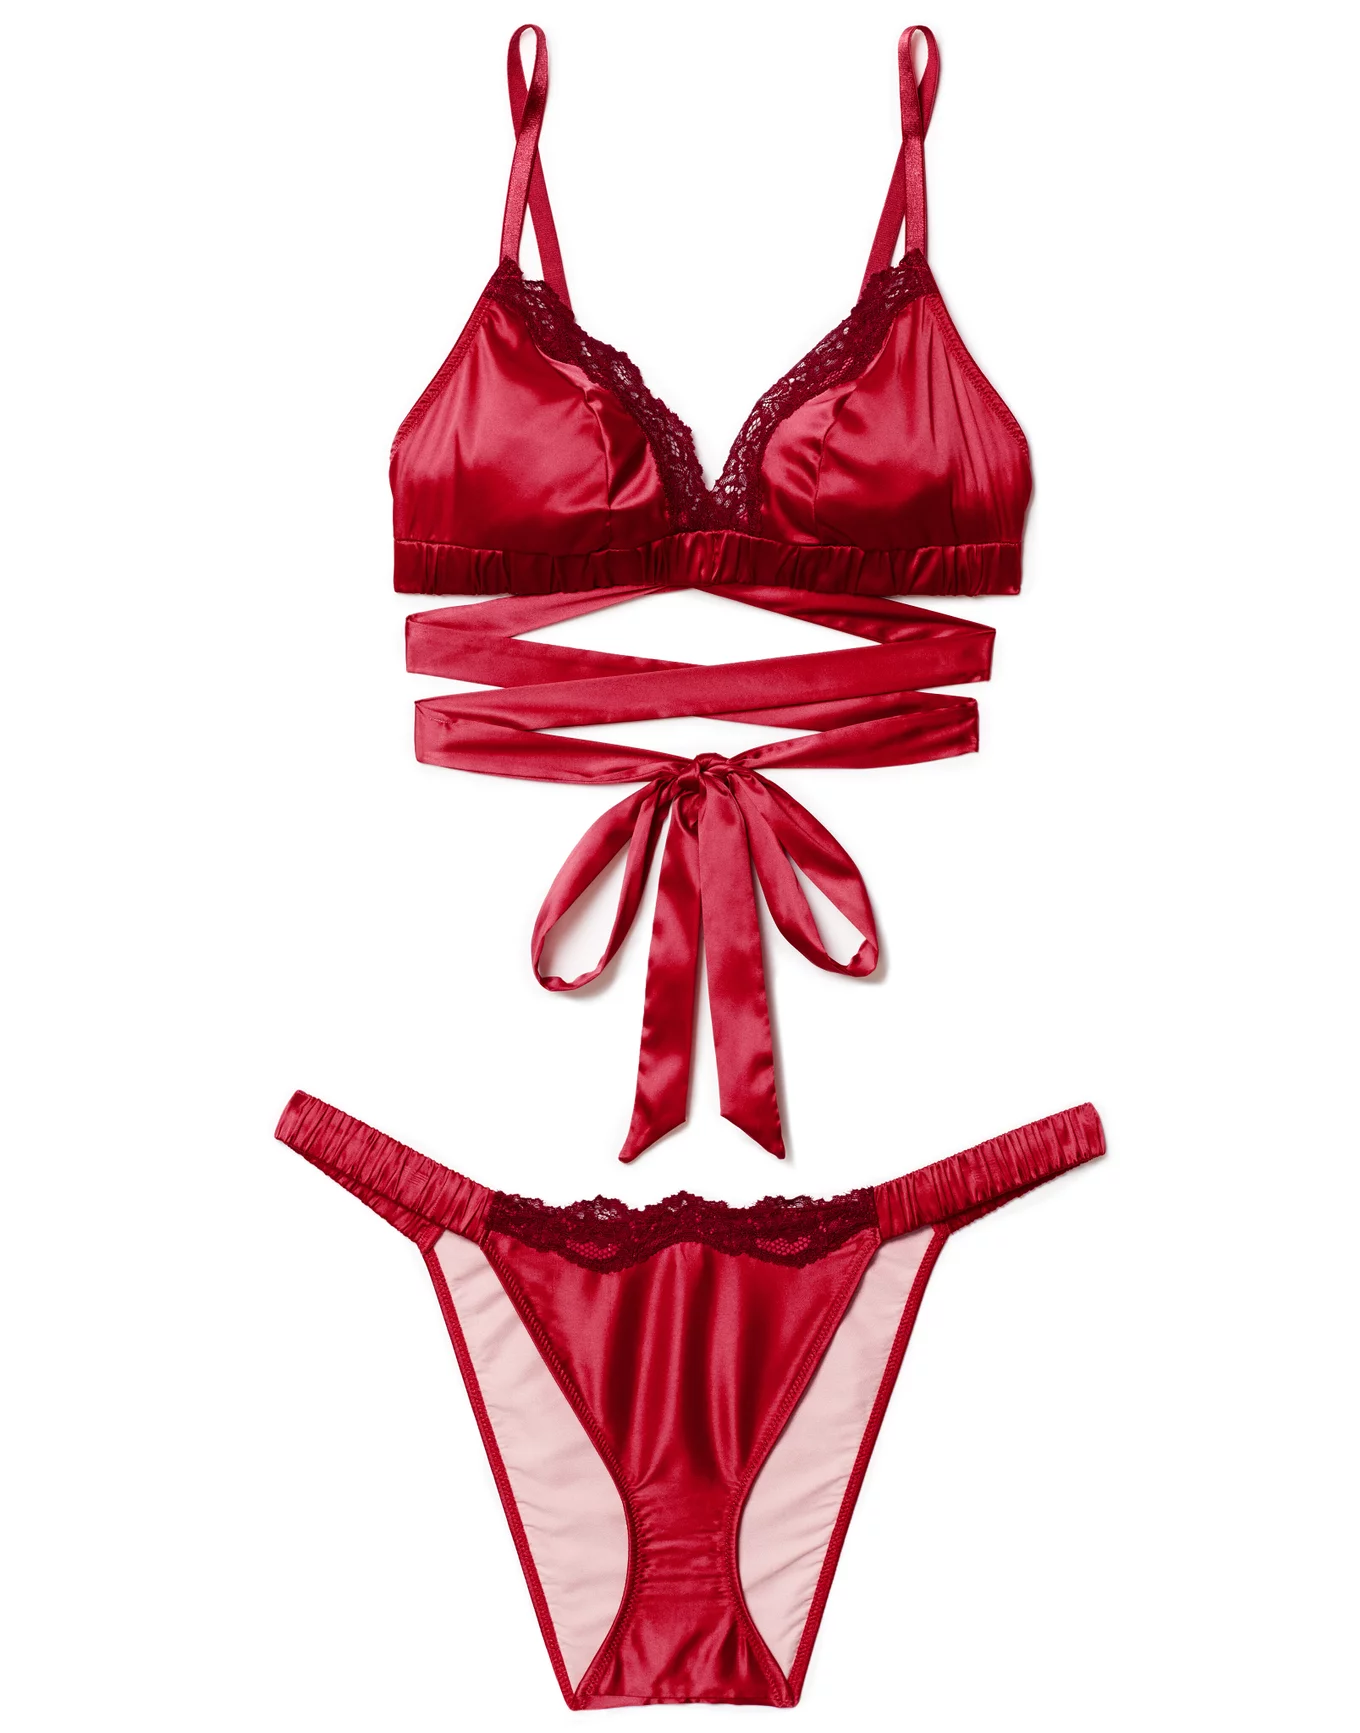 Buy Fascinating Lingerie Oh! Gorgeous Embraceable Red Bra Set (D